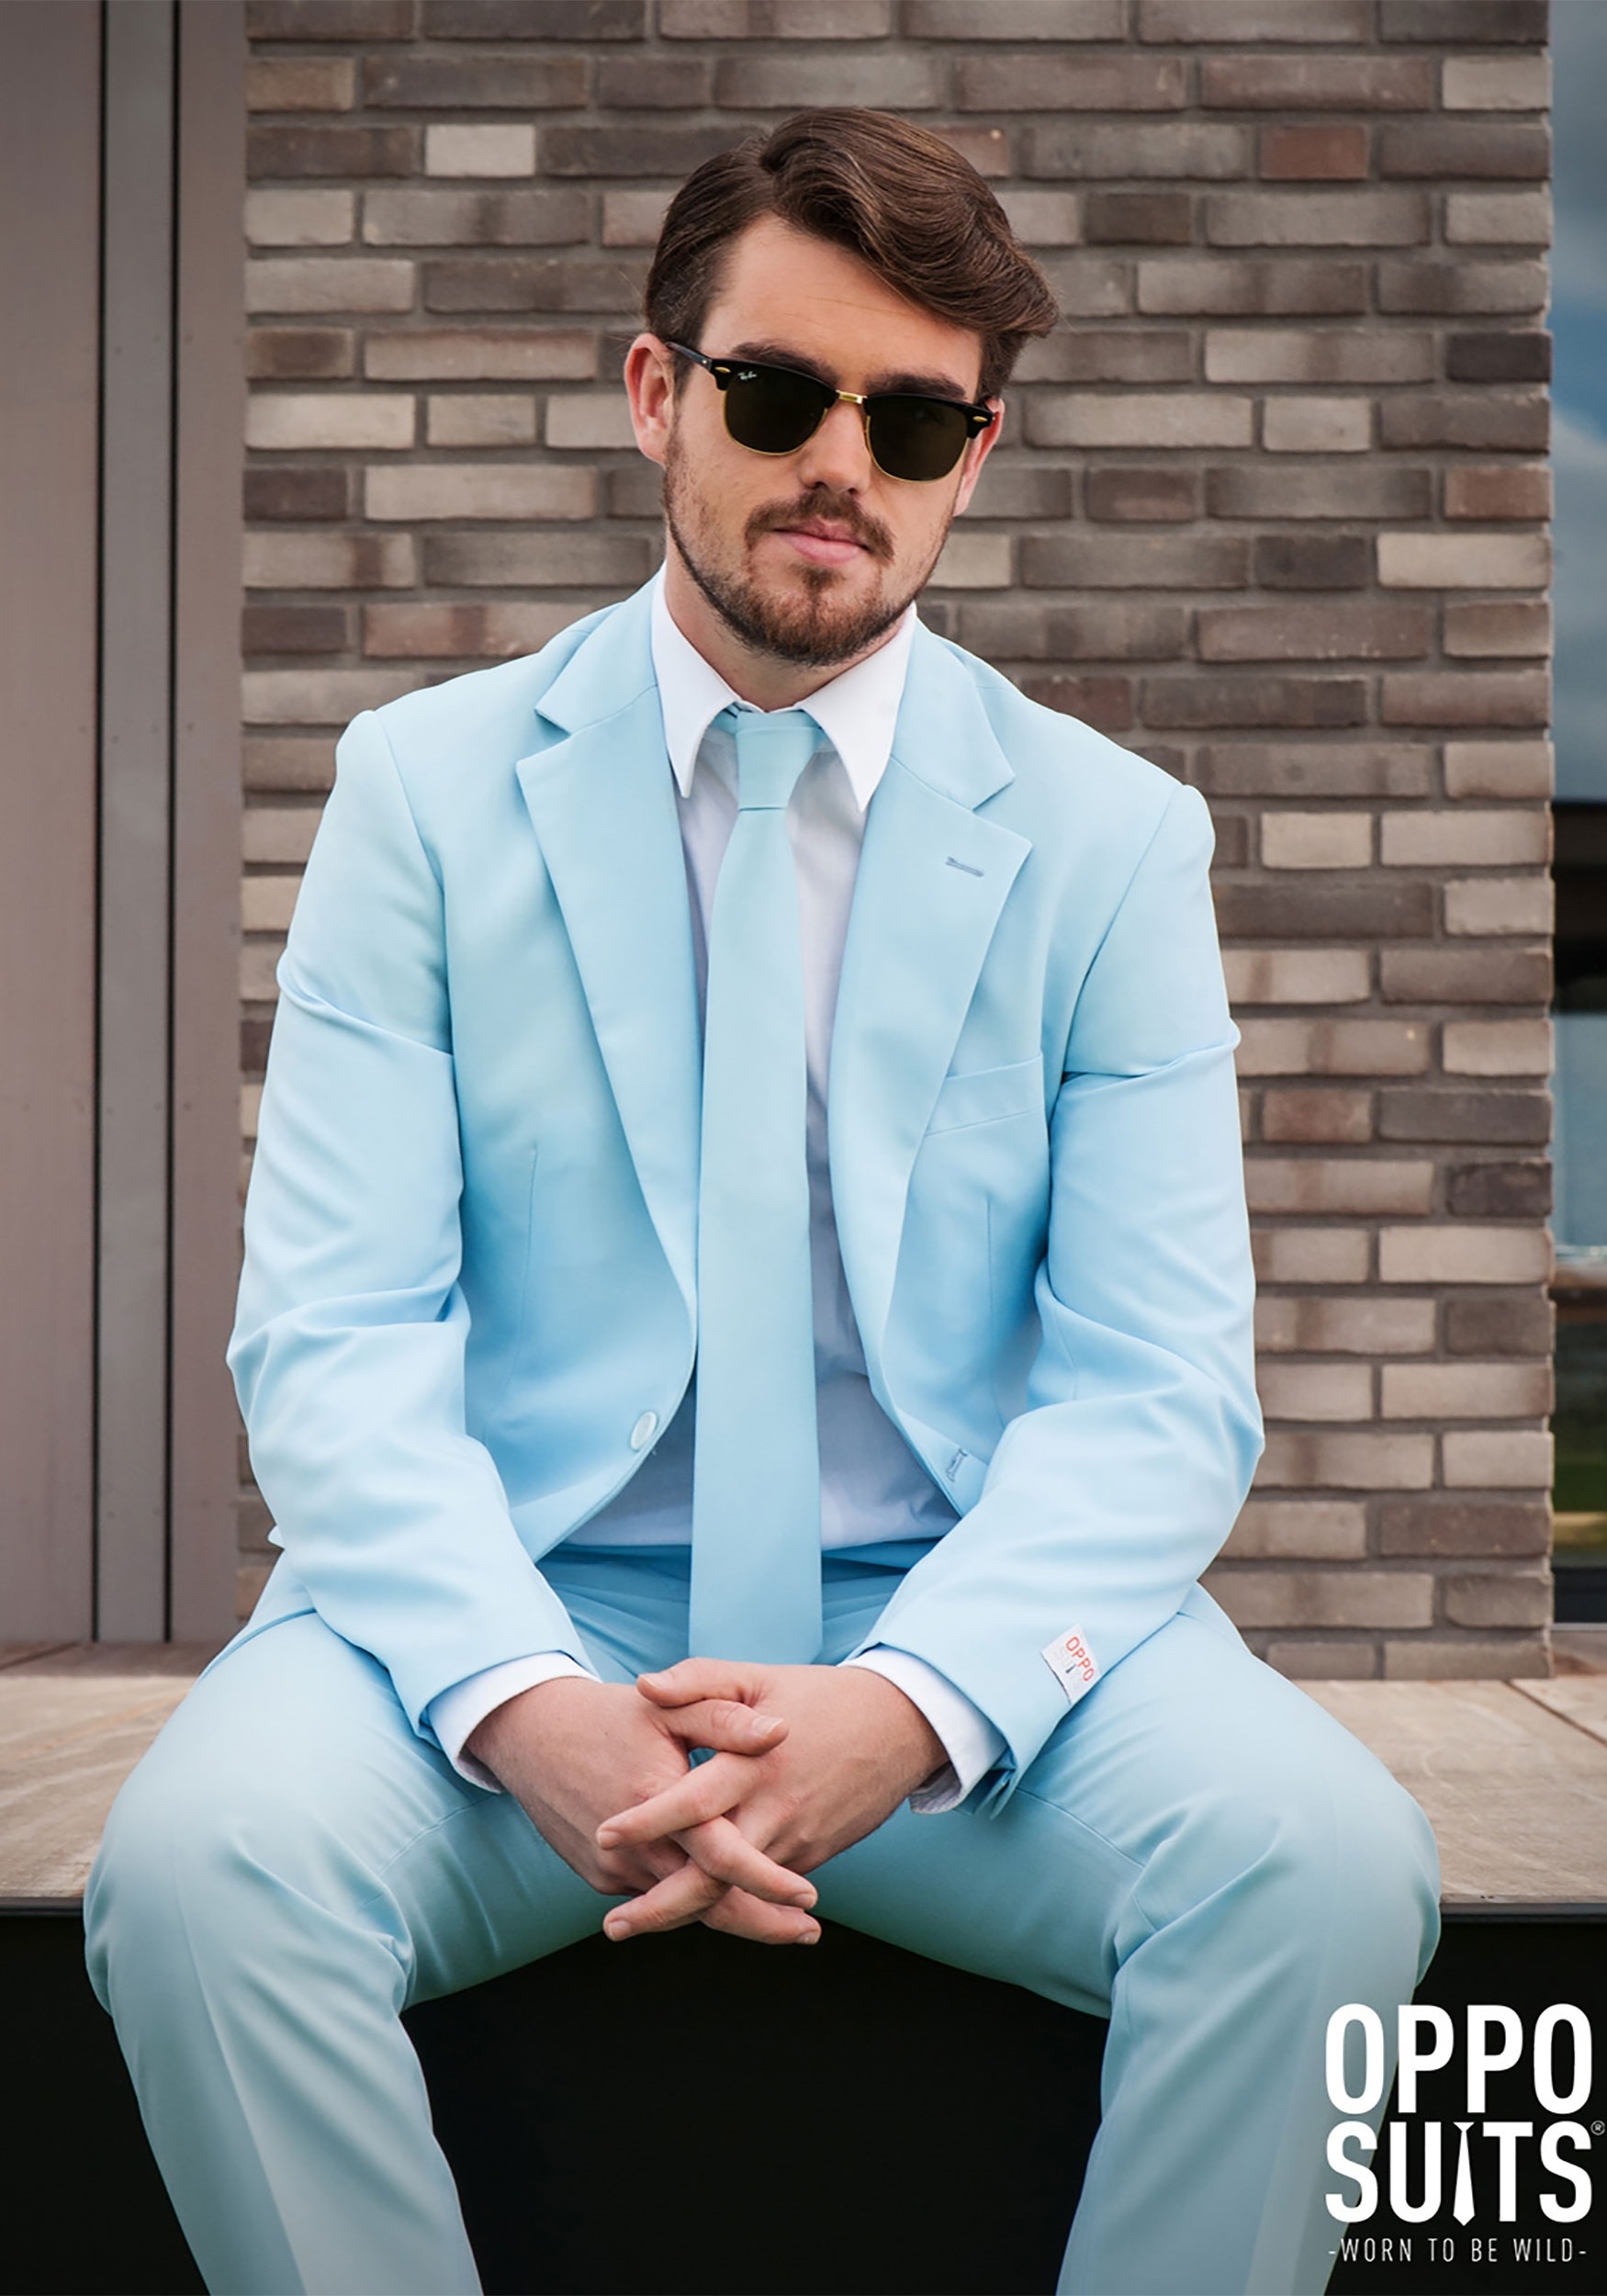 https://images.halloweencostumes.ca/products/32631/2-1-85292/mens-opposuits-baby-blue-suit.jpg